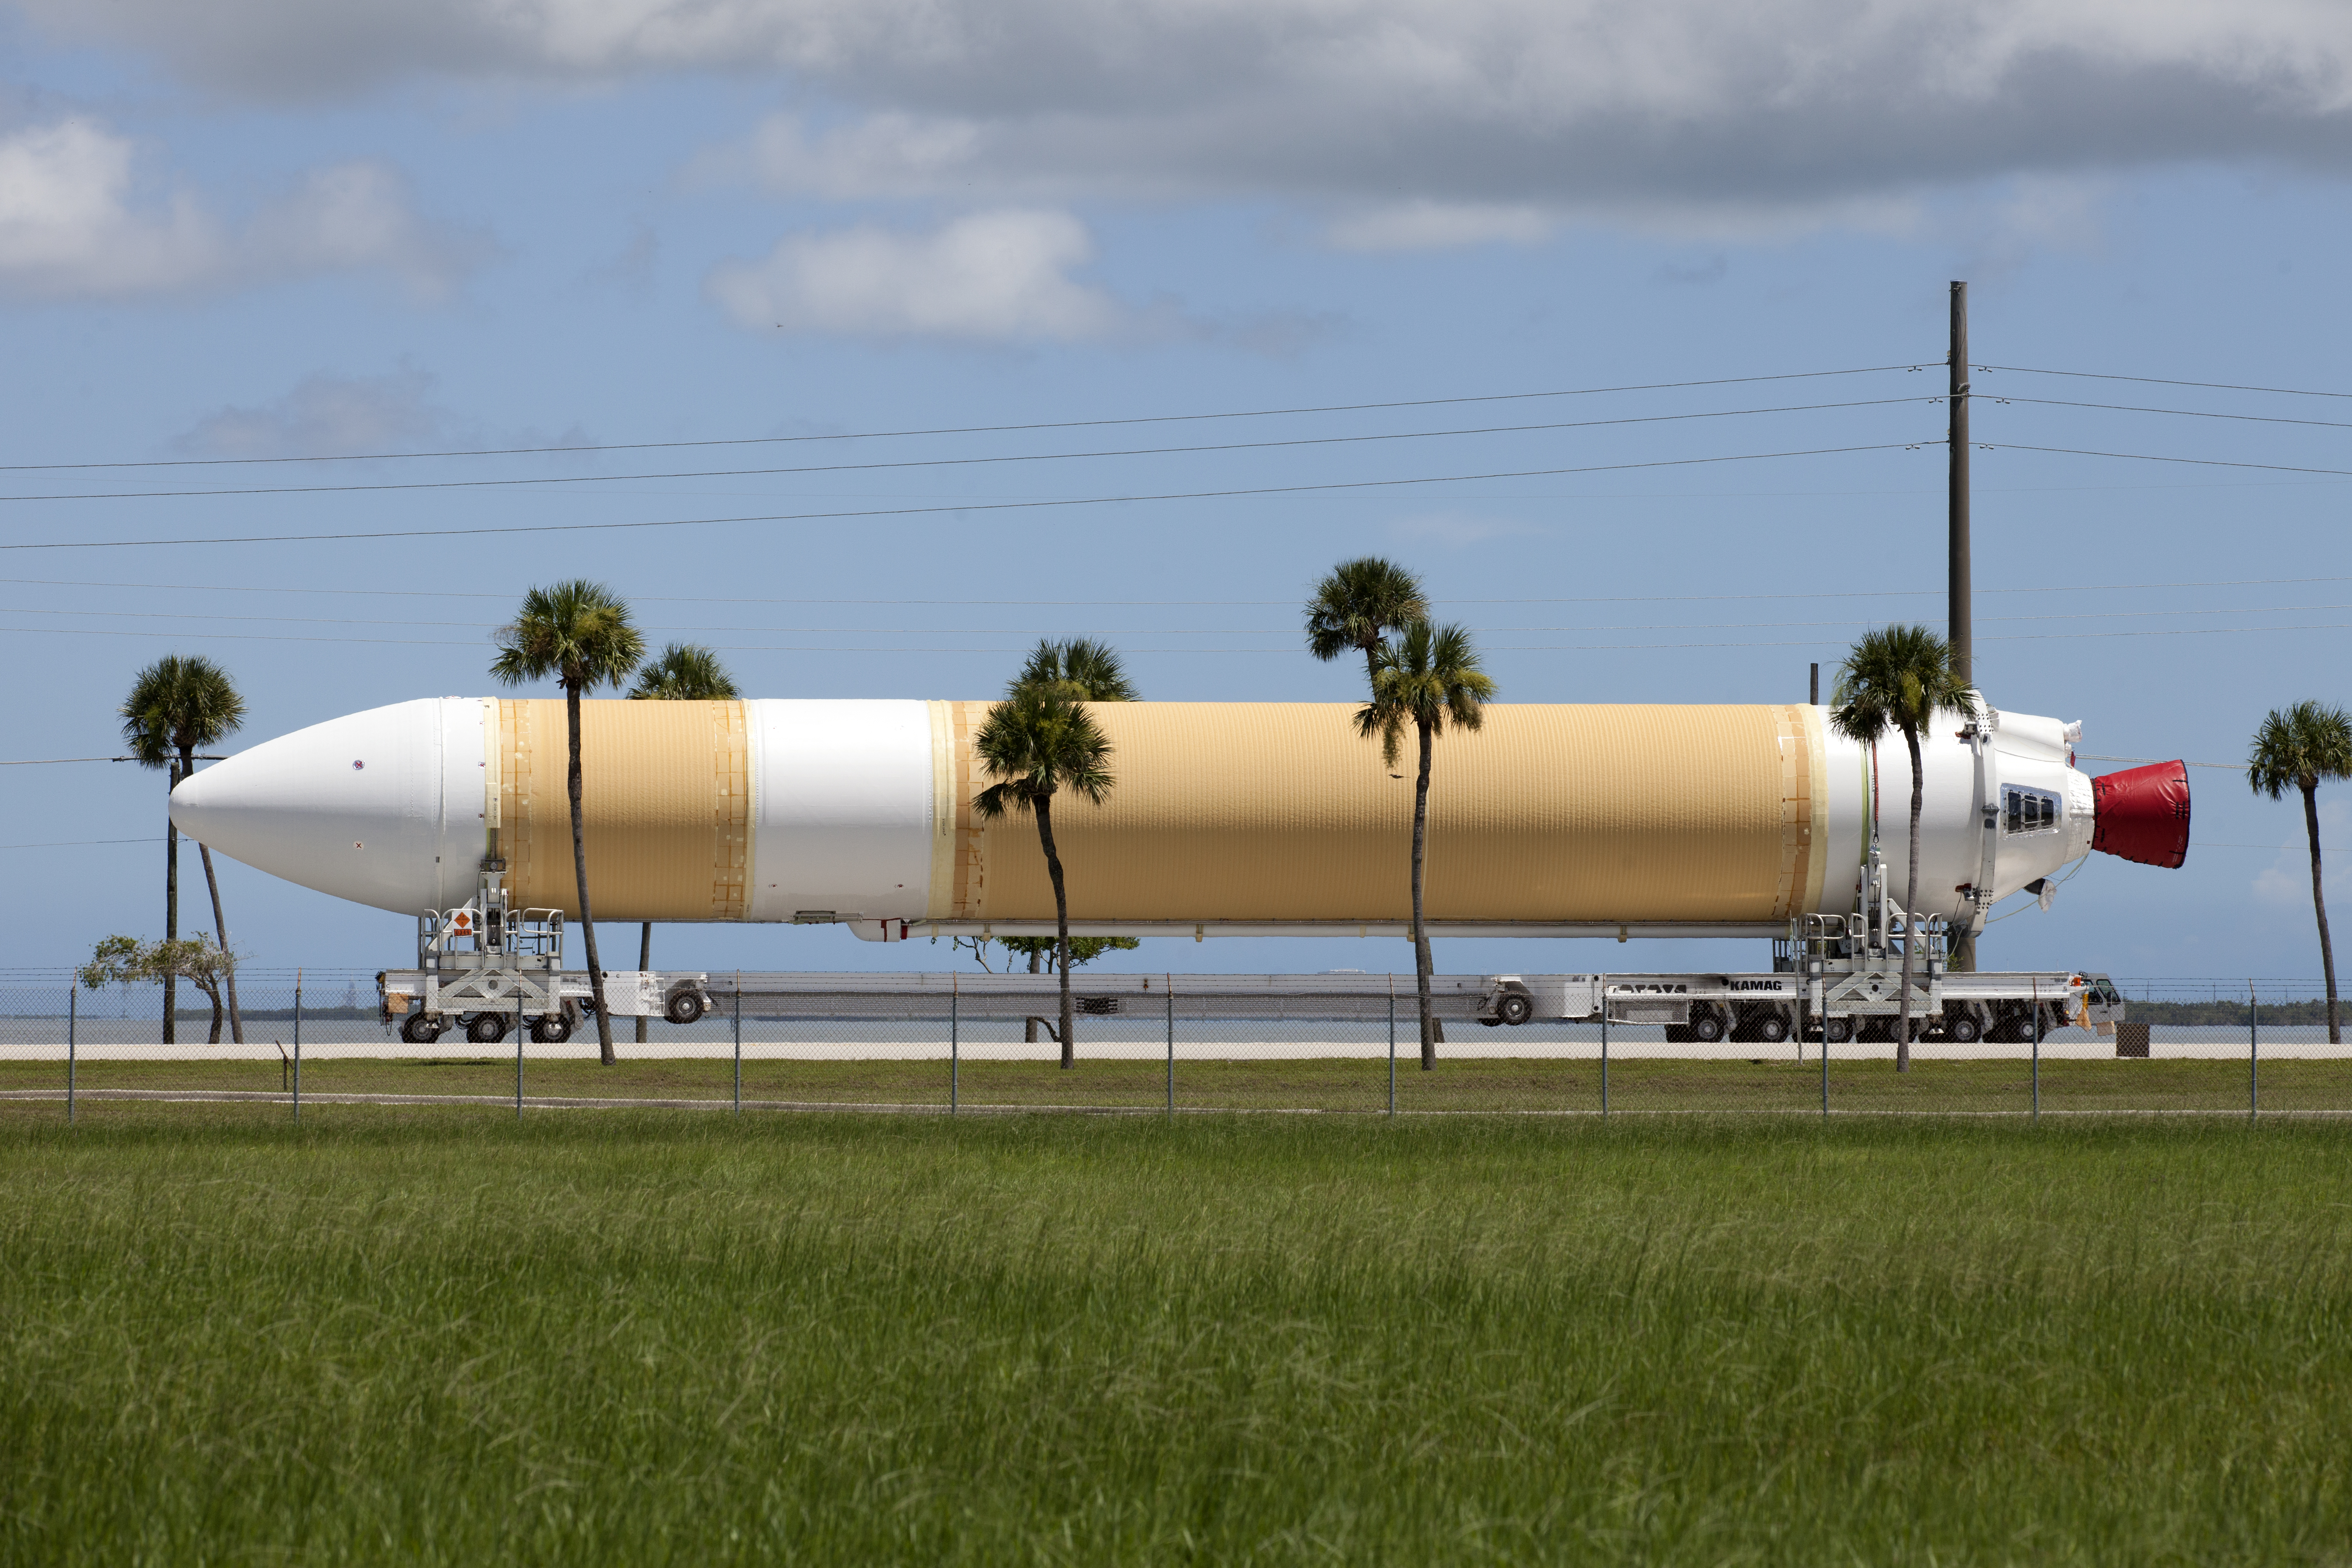 Framed by a series of cabbage palms, a United Launch Alliance Delta IV Heavy common booster core is transported by truck to Cape Canaveral Air Force Station’s Launch Complex 37 Horizontal Processing Facility after arriving at Port Canaveral. The Delta IV Heavy will launch NASA’s upcoming Parker Solar Probe mission. 